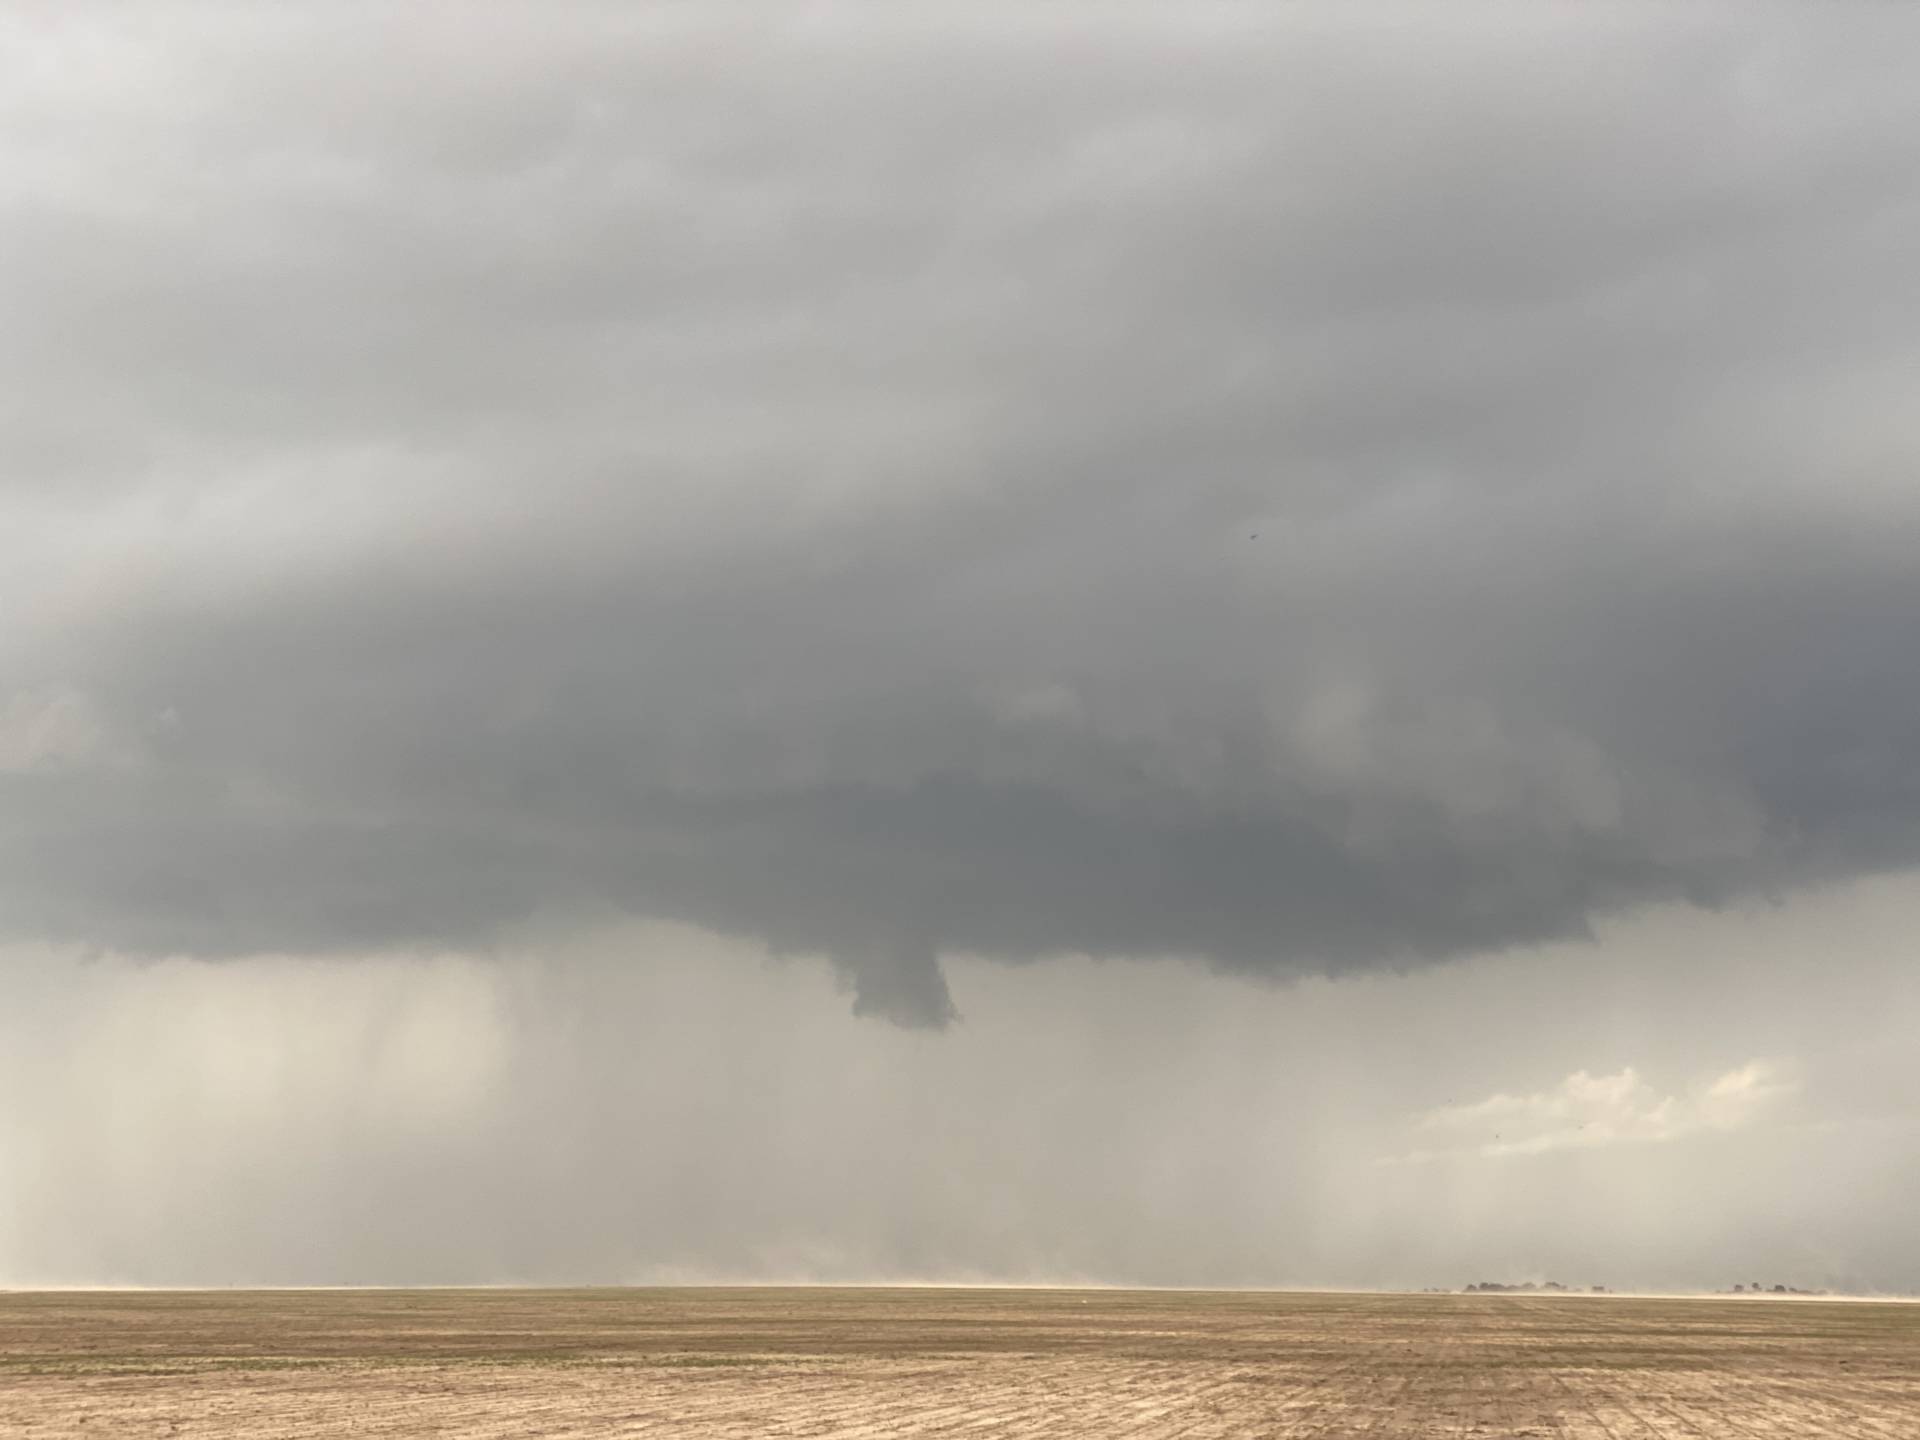 New lowering on cell west of Gruver, TX #txwx
..